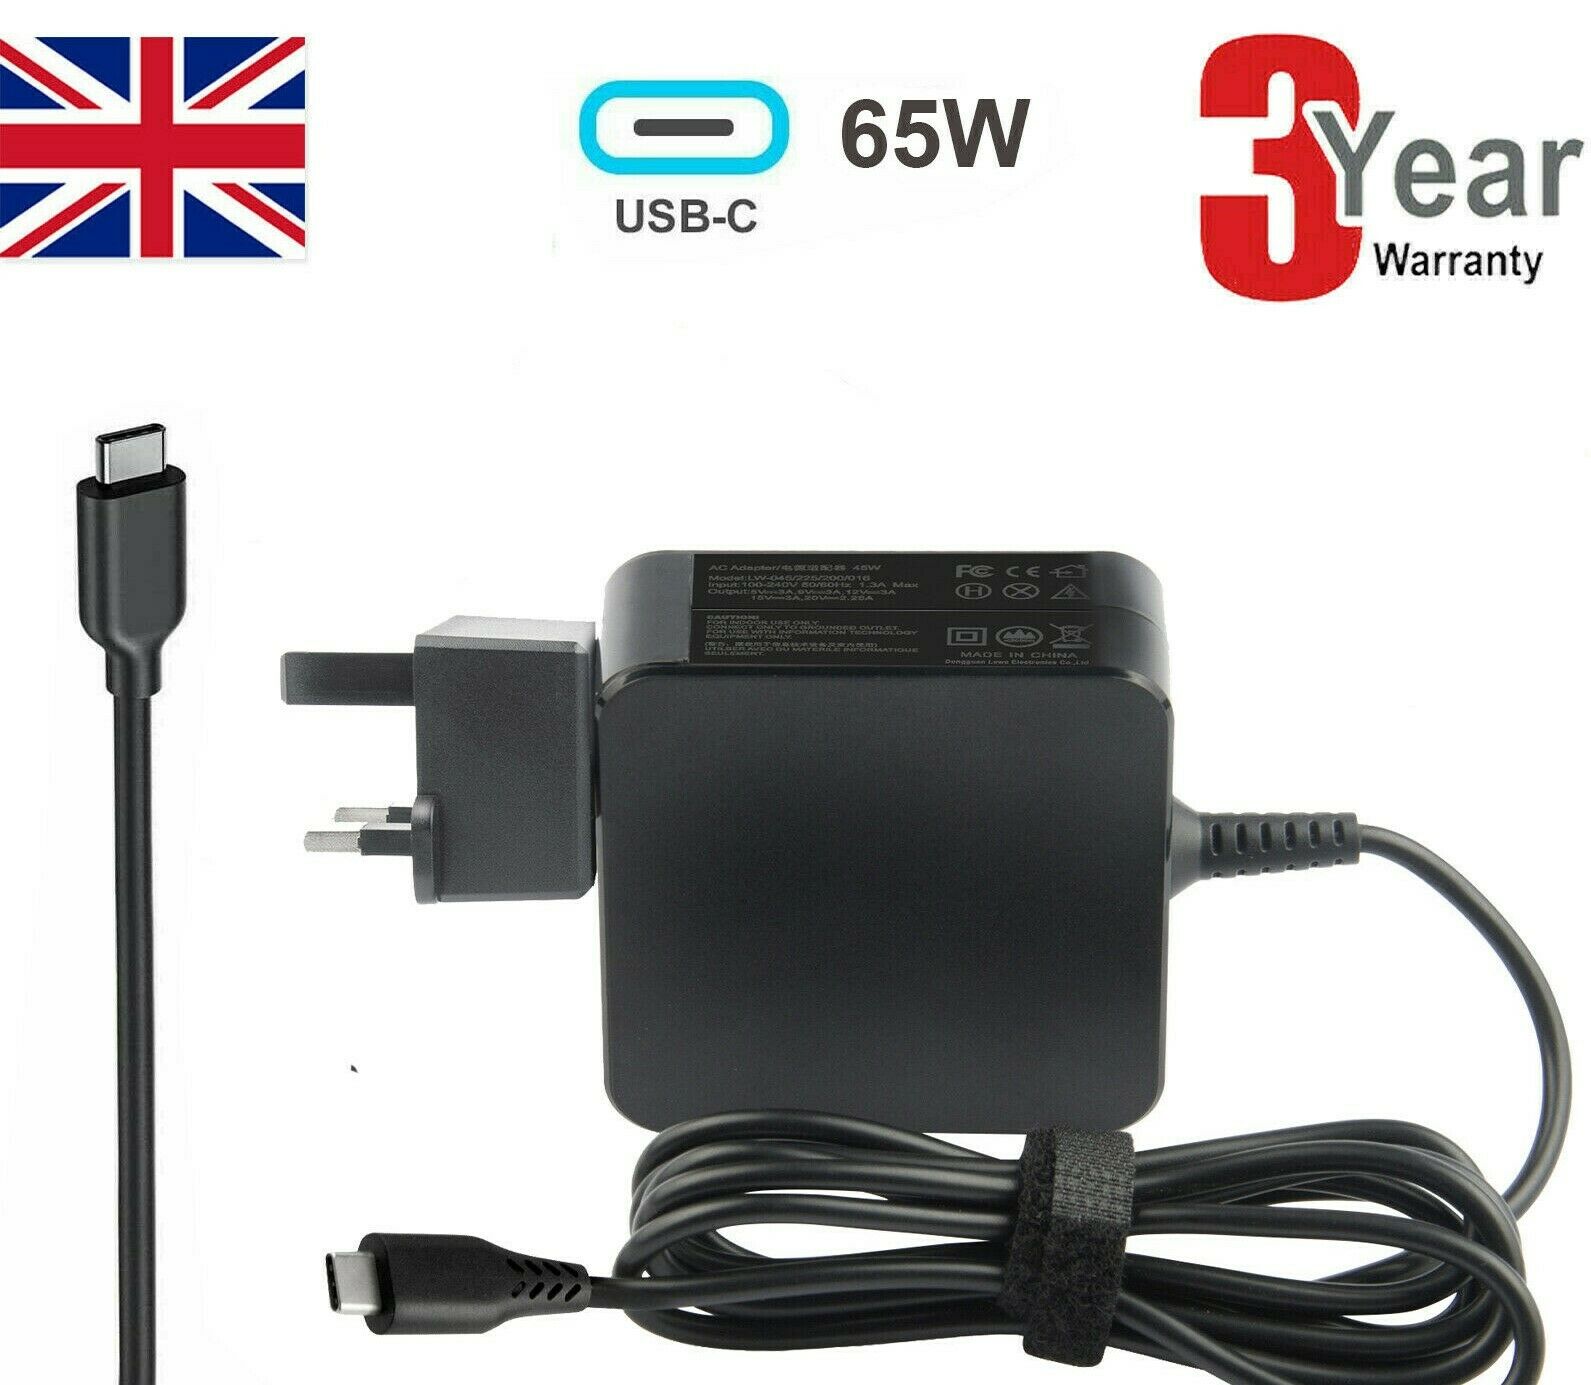 65W USB Type-C Adapter Charger for DELL,HP,ASUS,Lenovo,Xiaomi,Huawei,Acer Laptop Colour: Black EAN: Does not apply Com - Click Image to Close